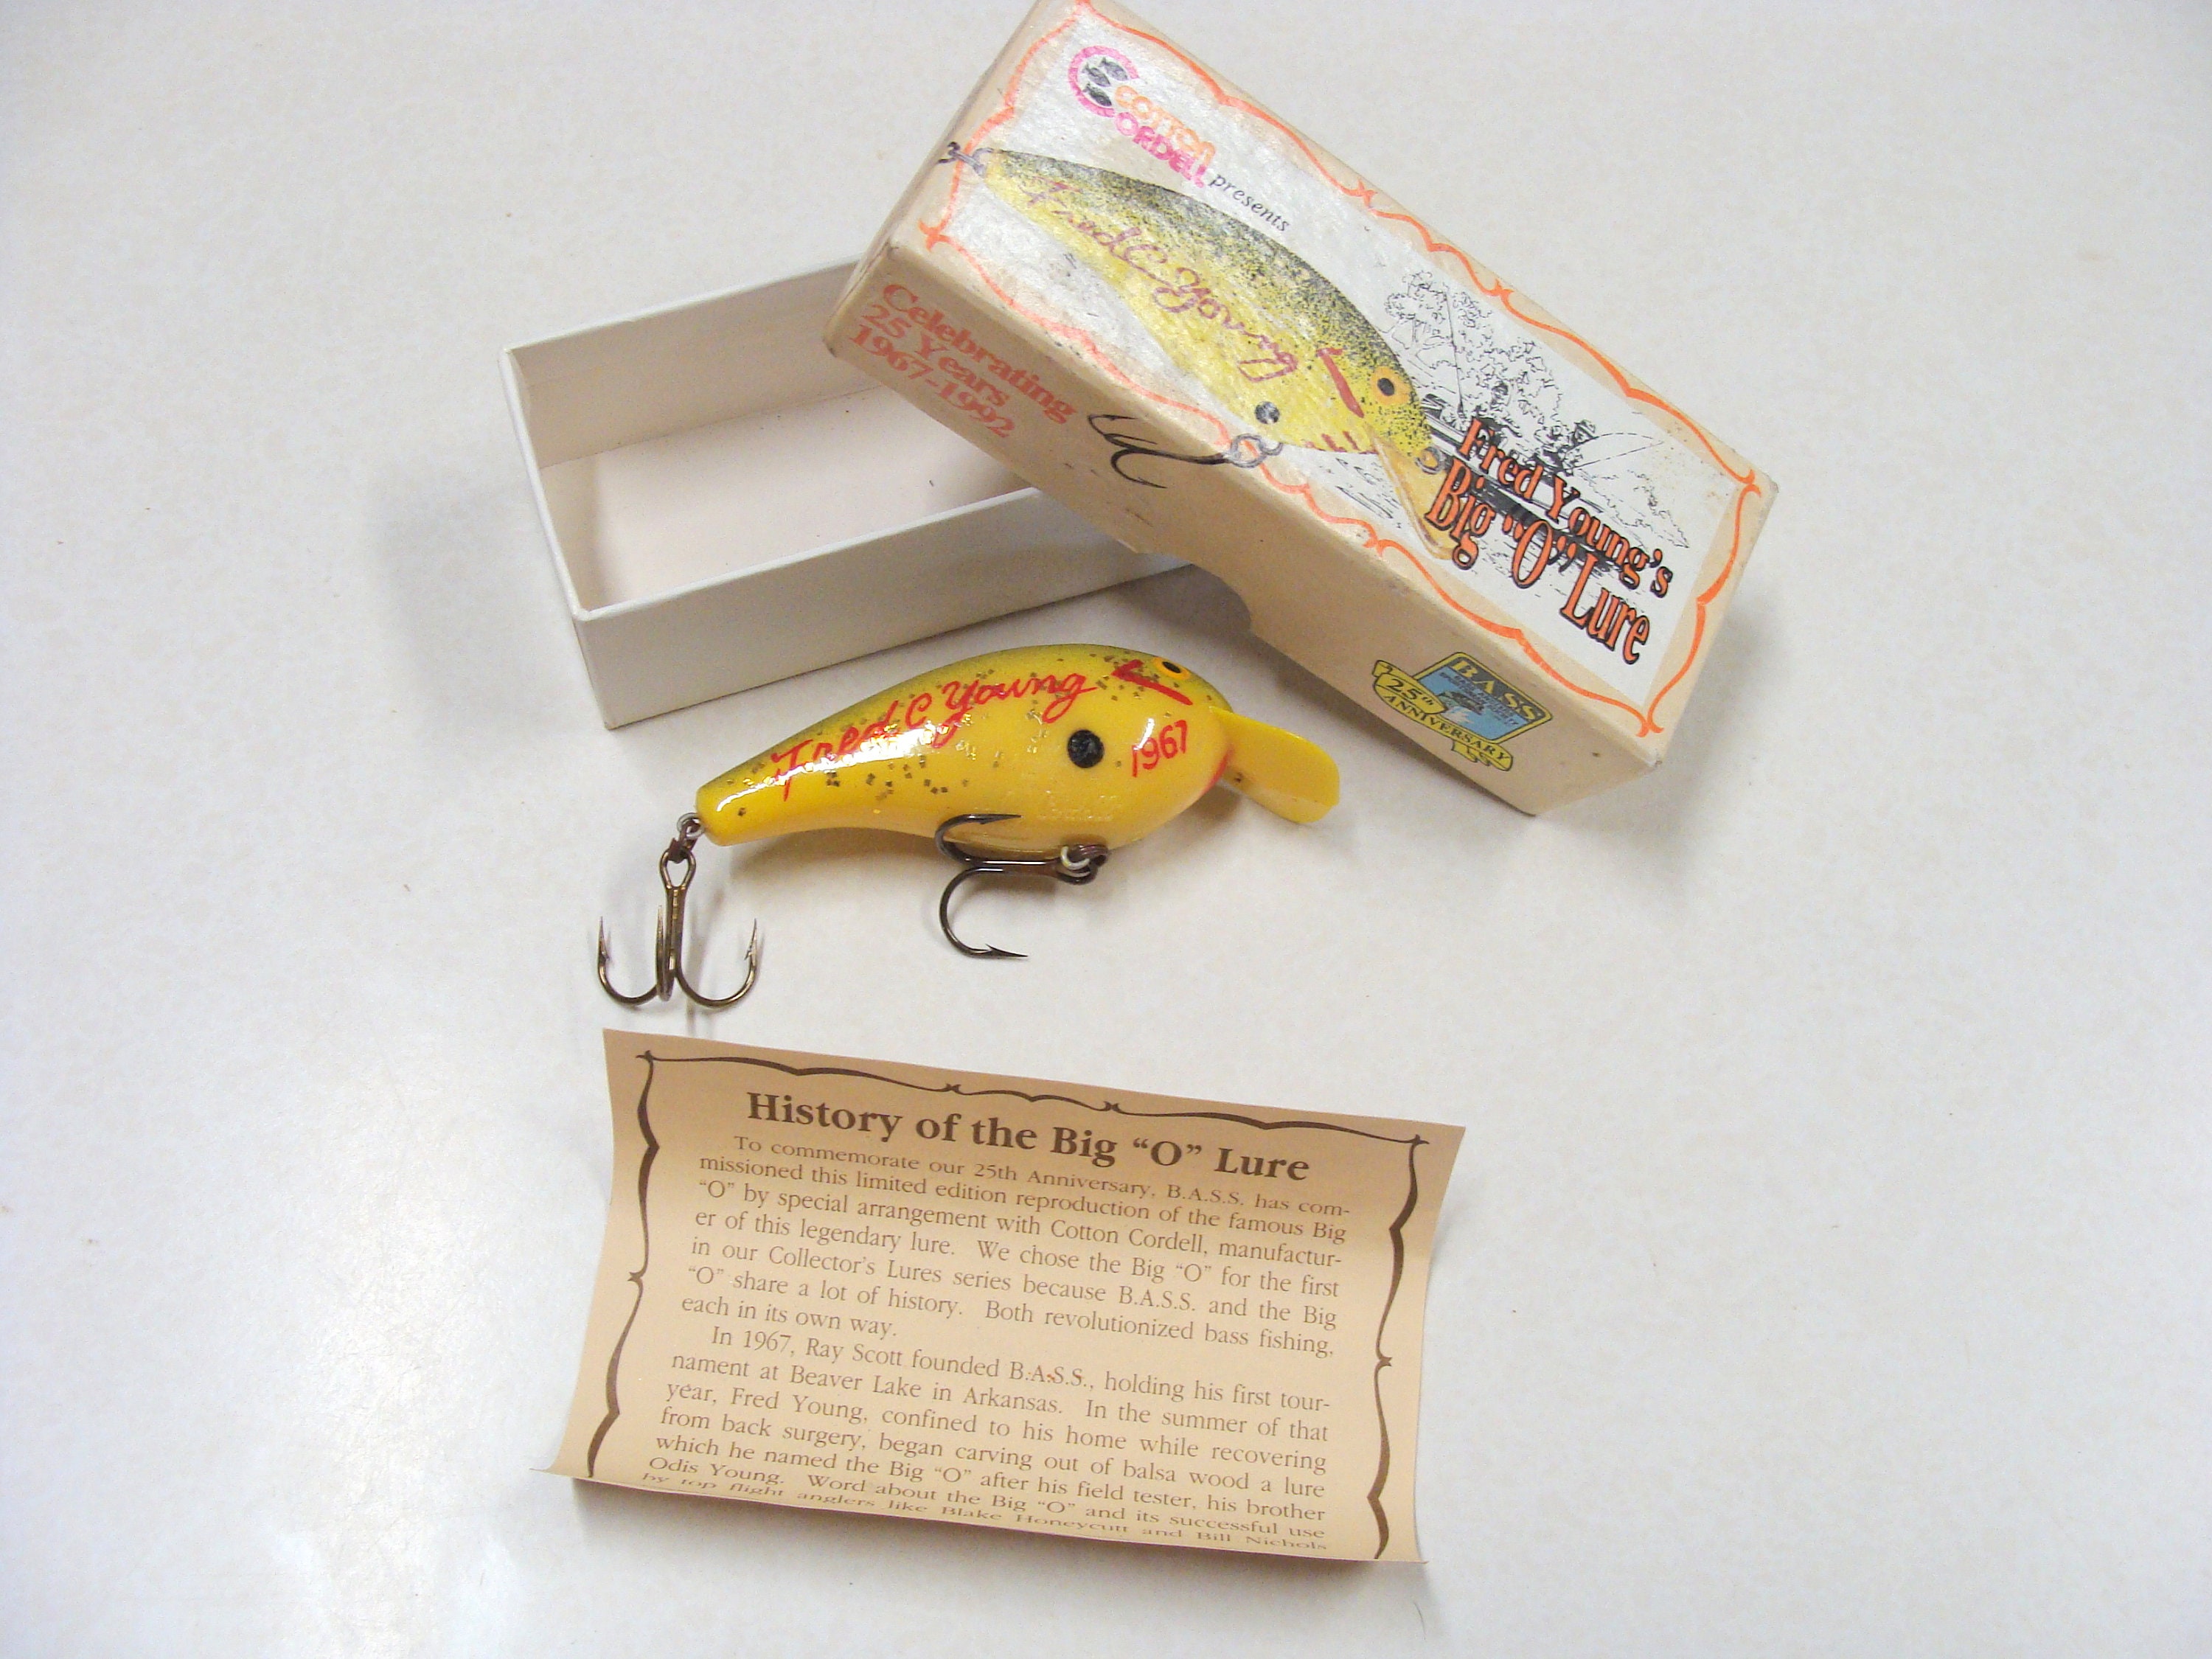 Cotton Cordell Fred Young's Big o Lure, Incl. Box, Paper History